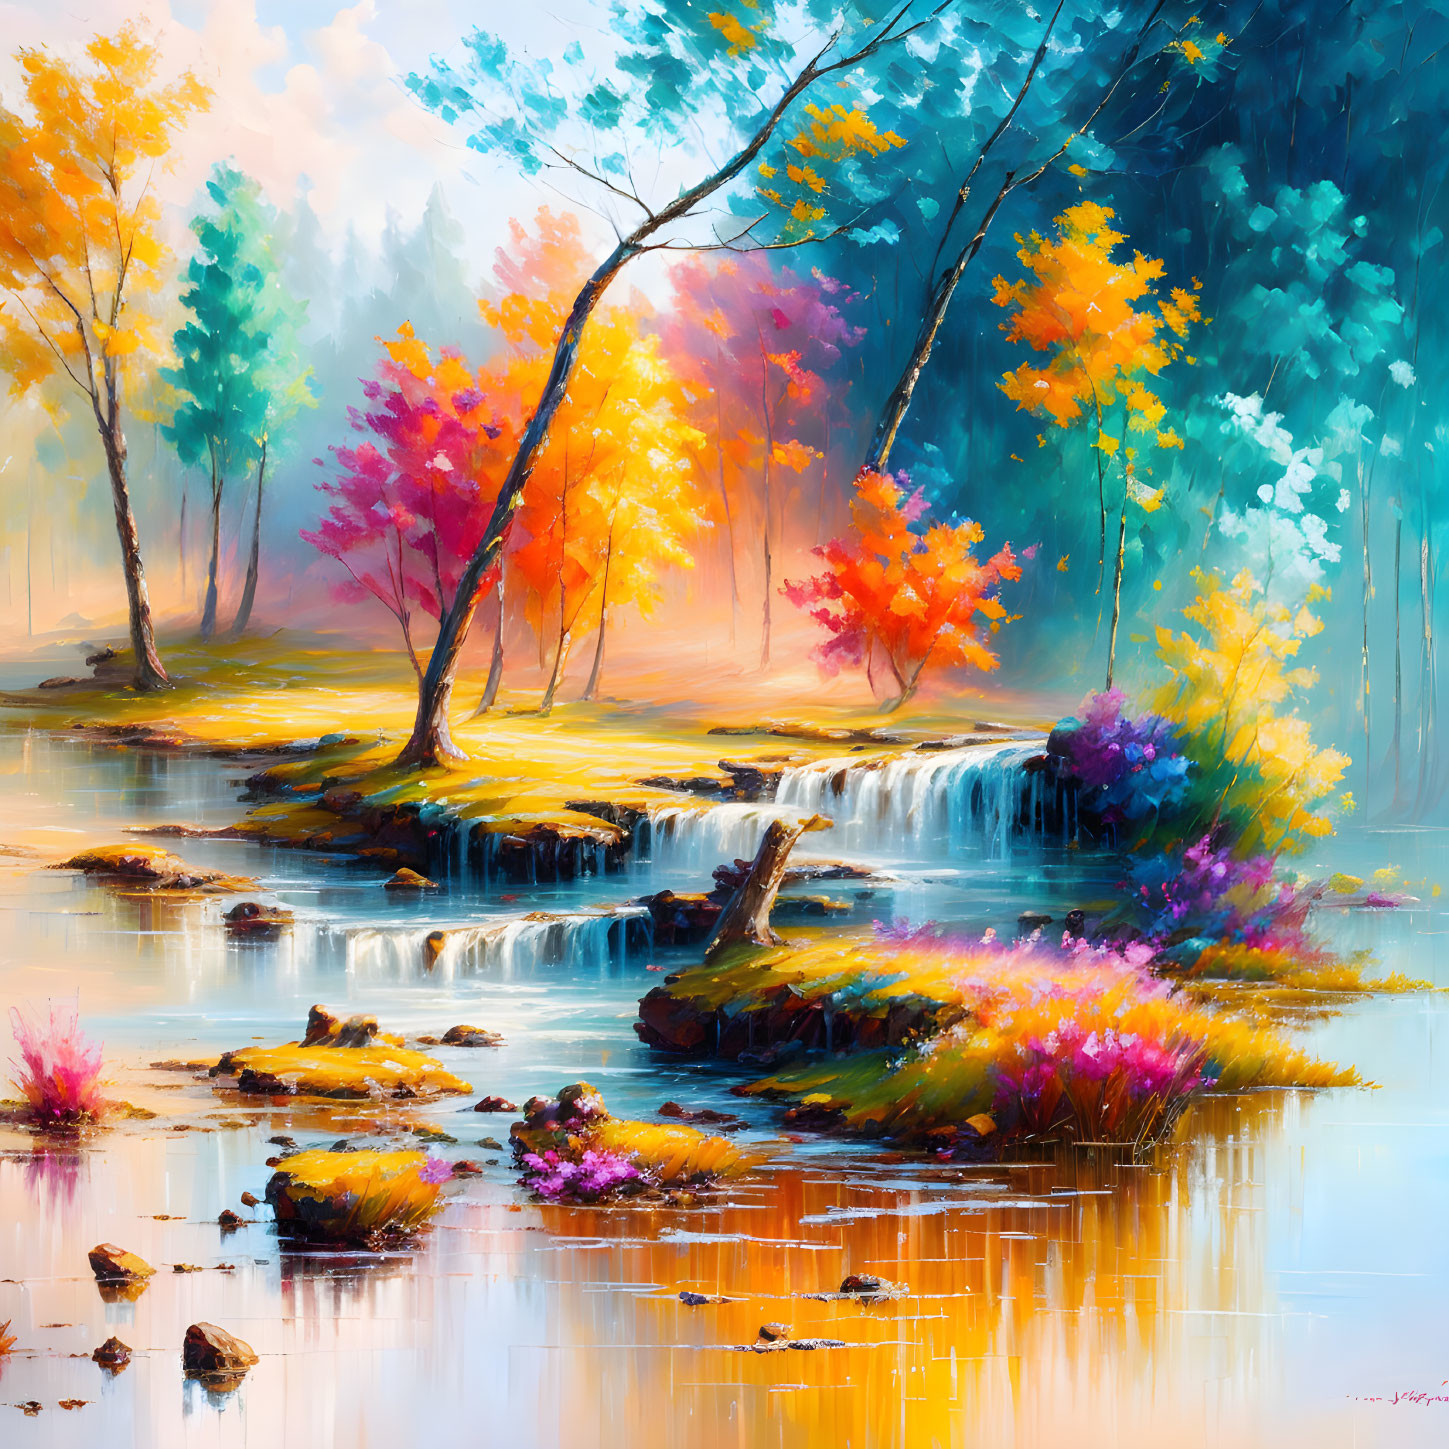 Vivid Landscape Painting: Serene Forest, Autumn Trees, Waterfall & River